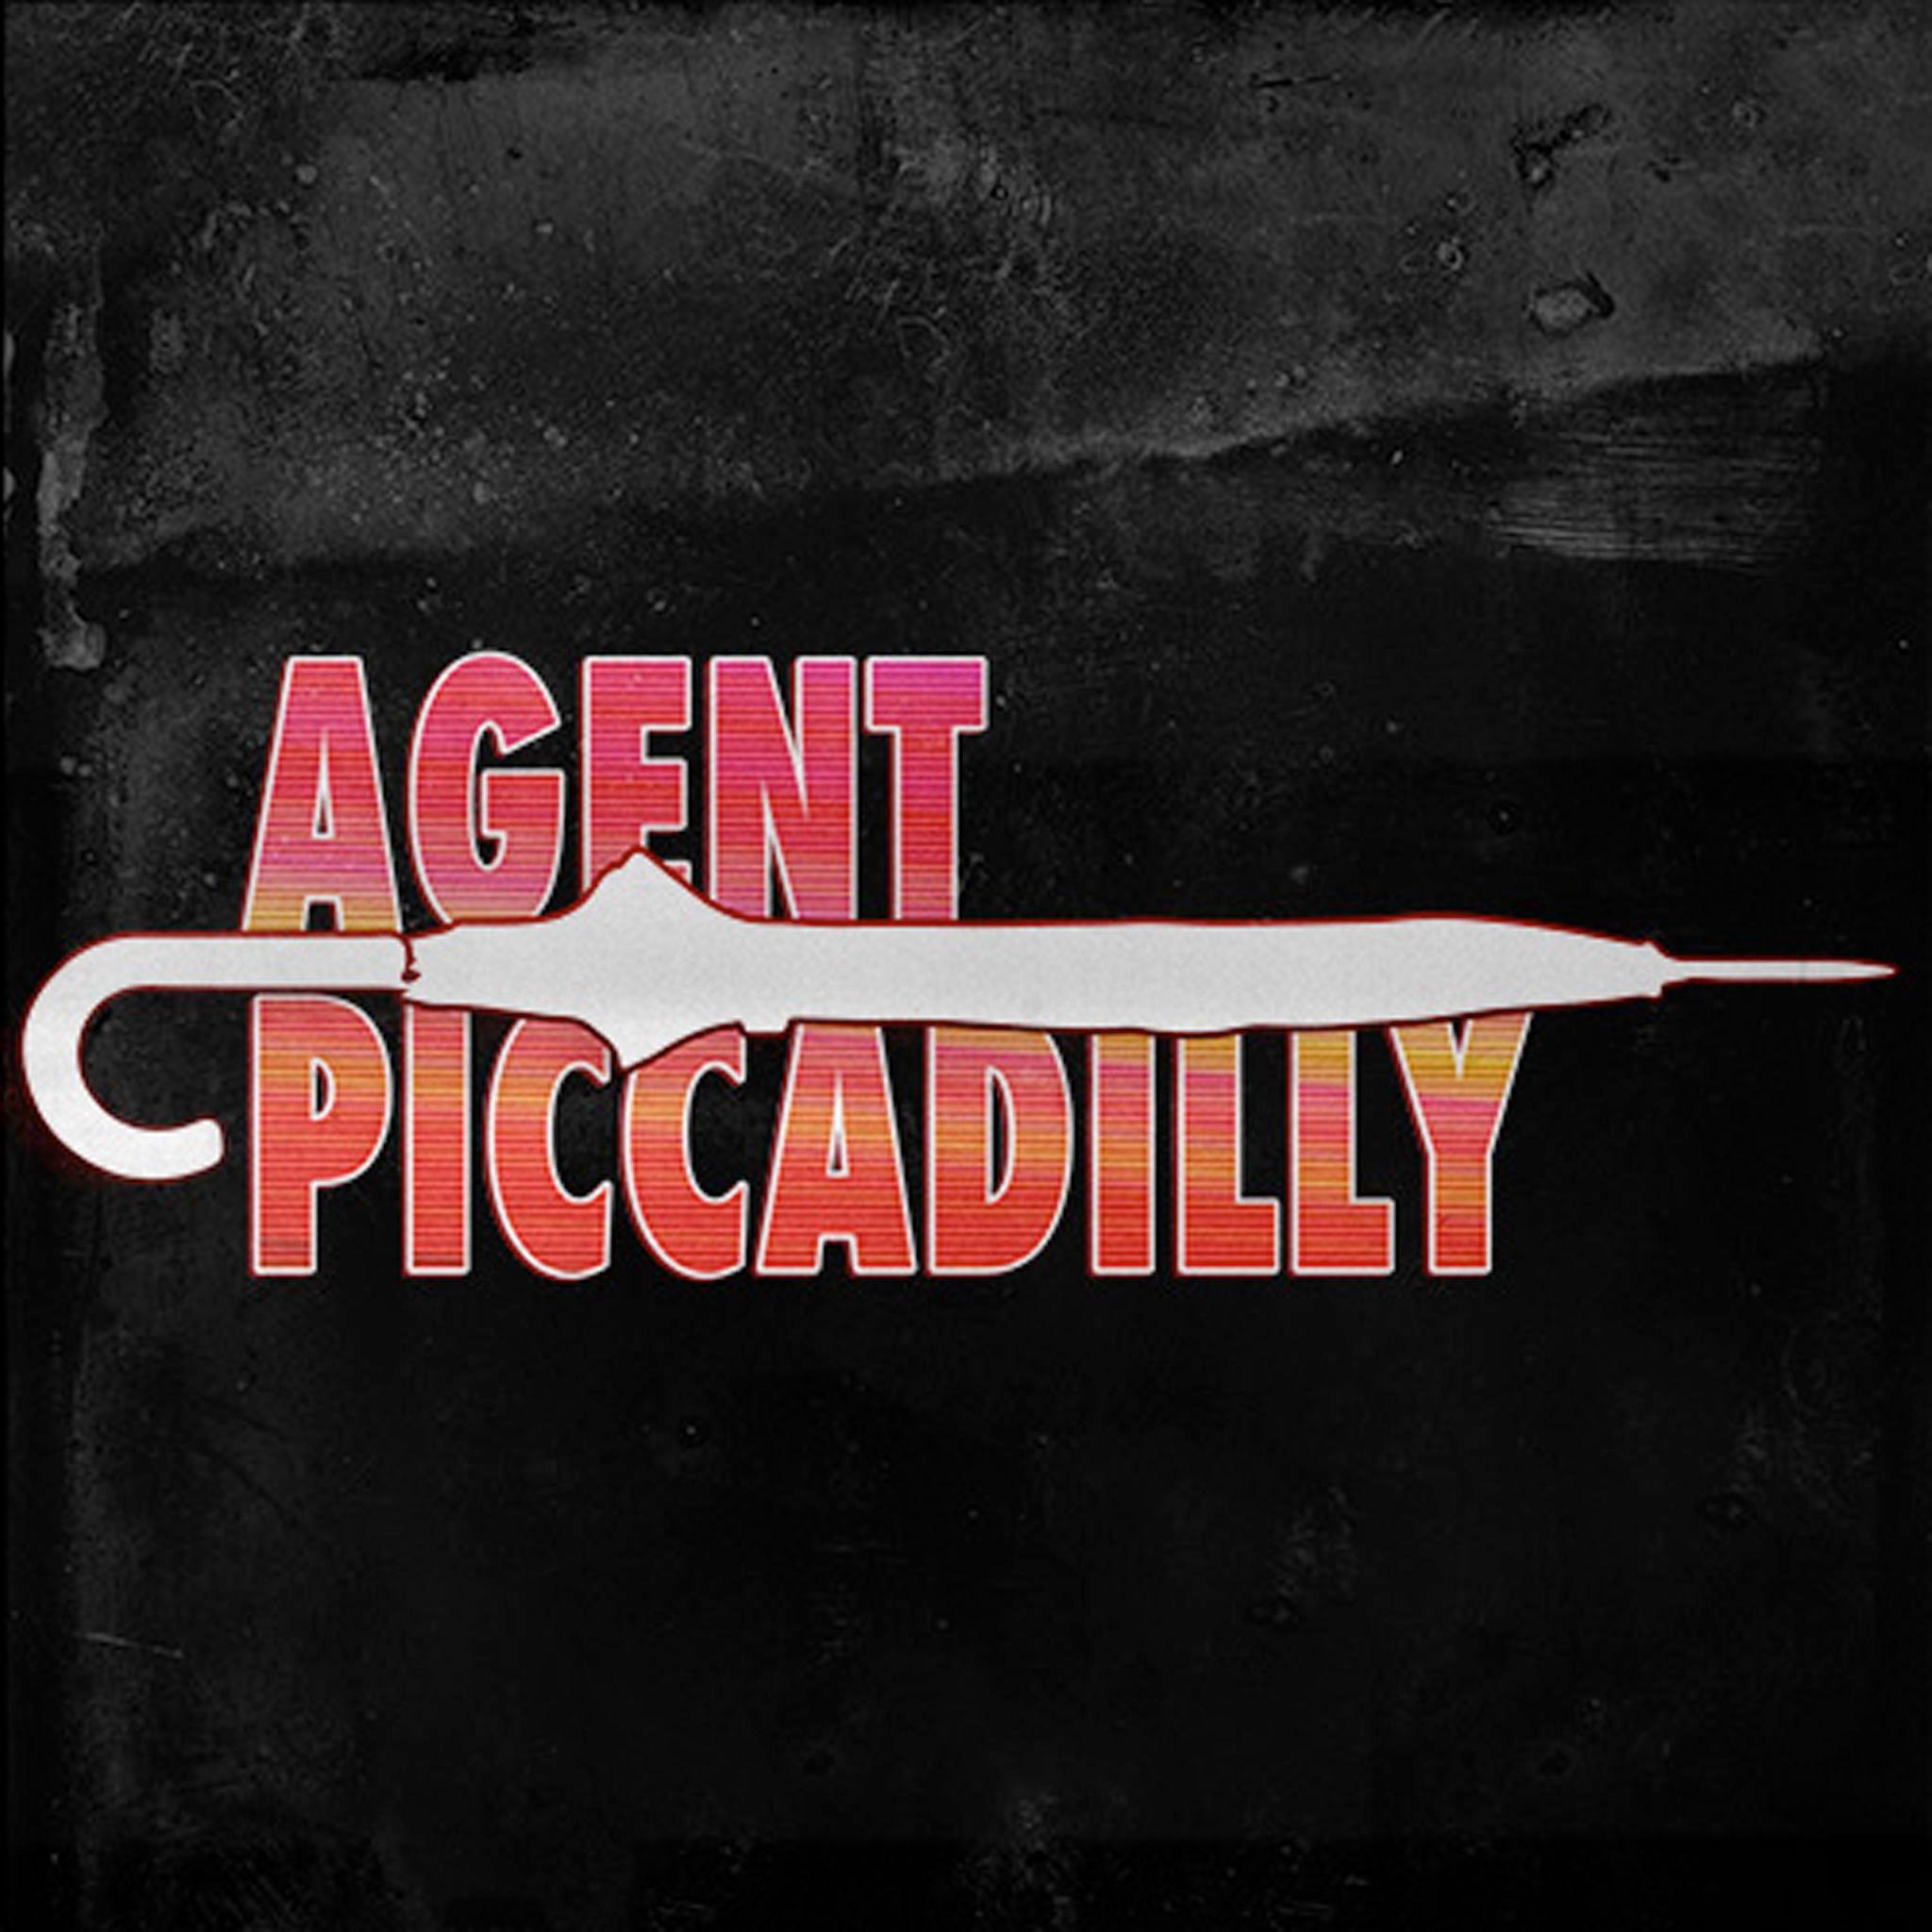 Agent Piccadilly